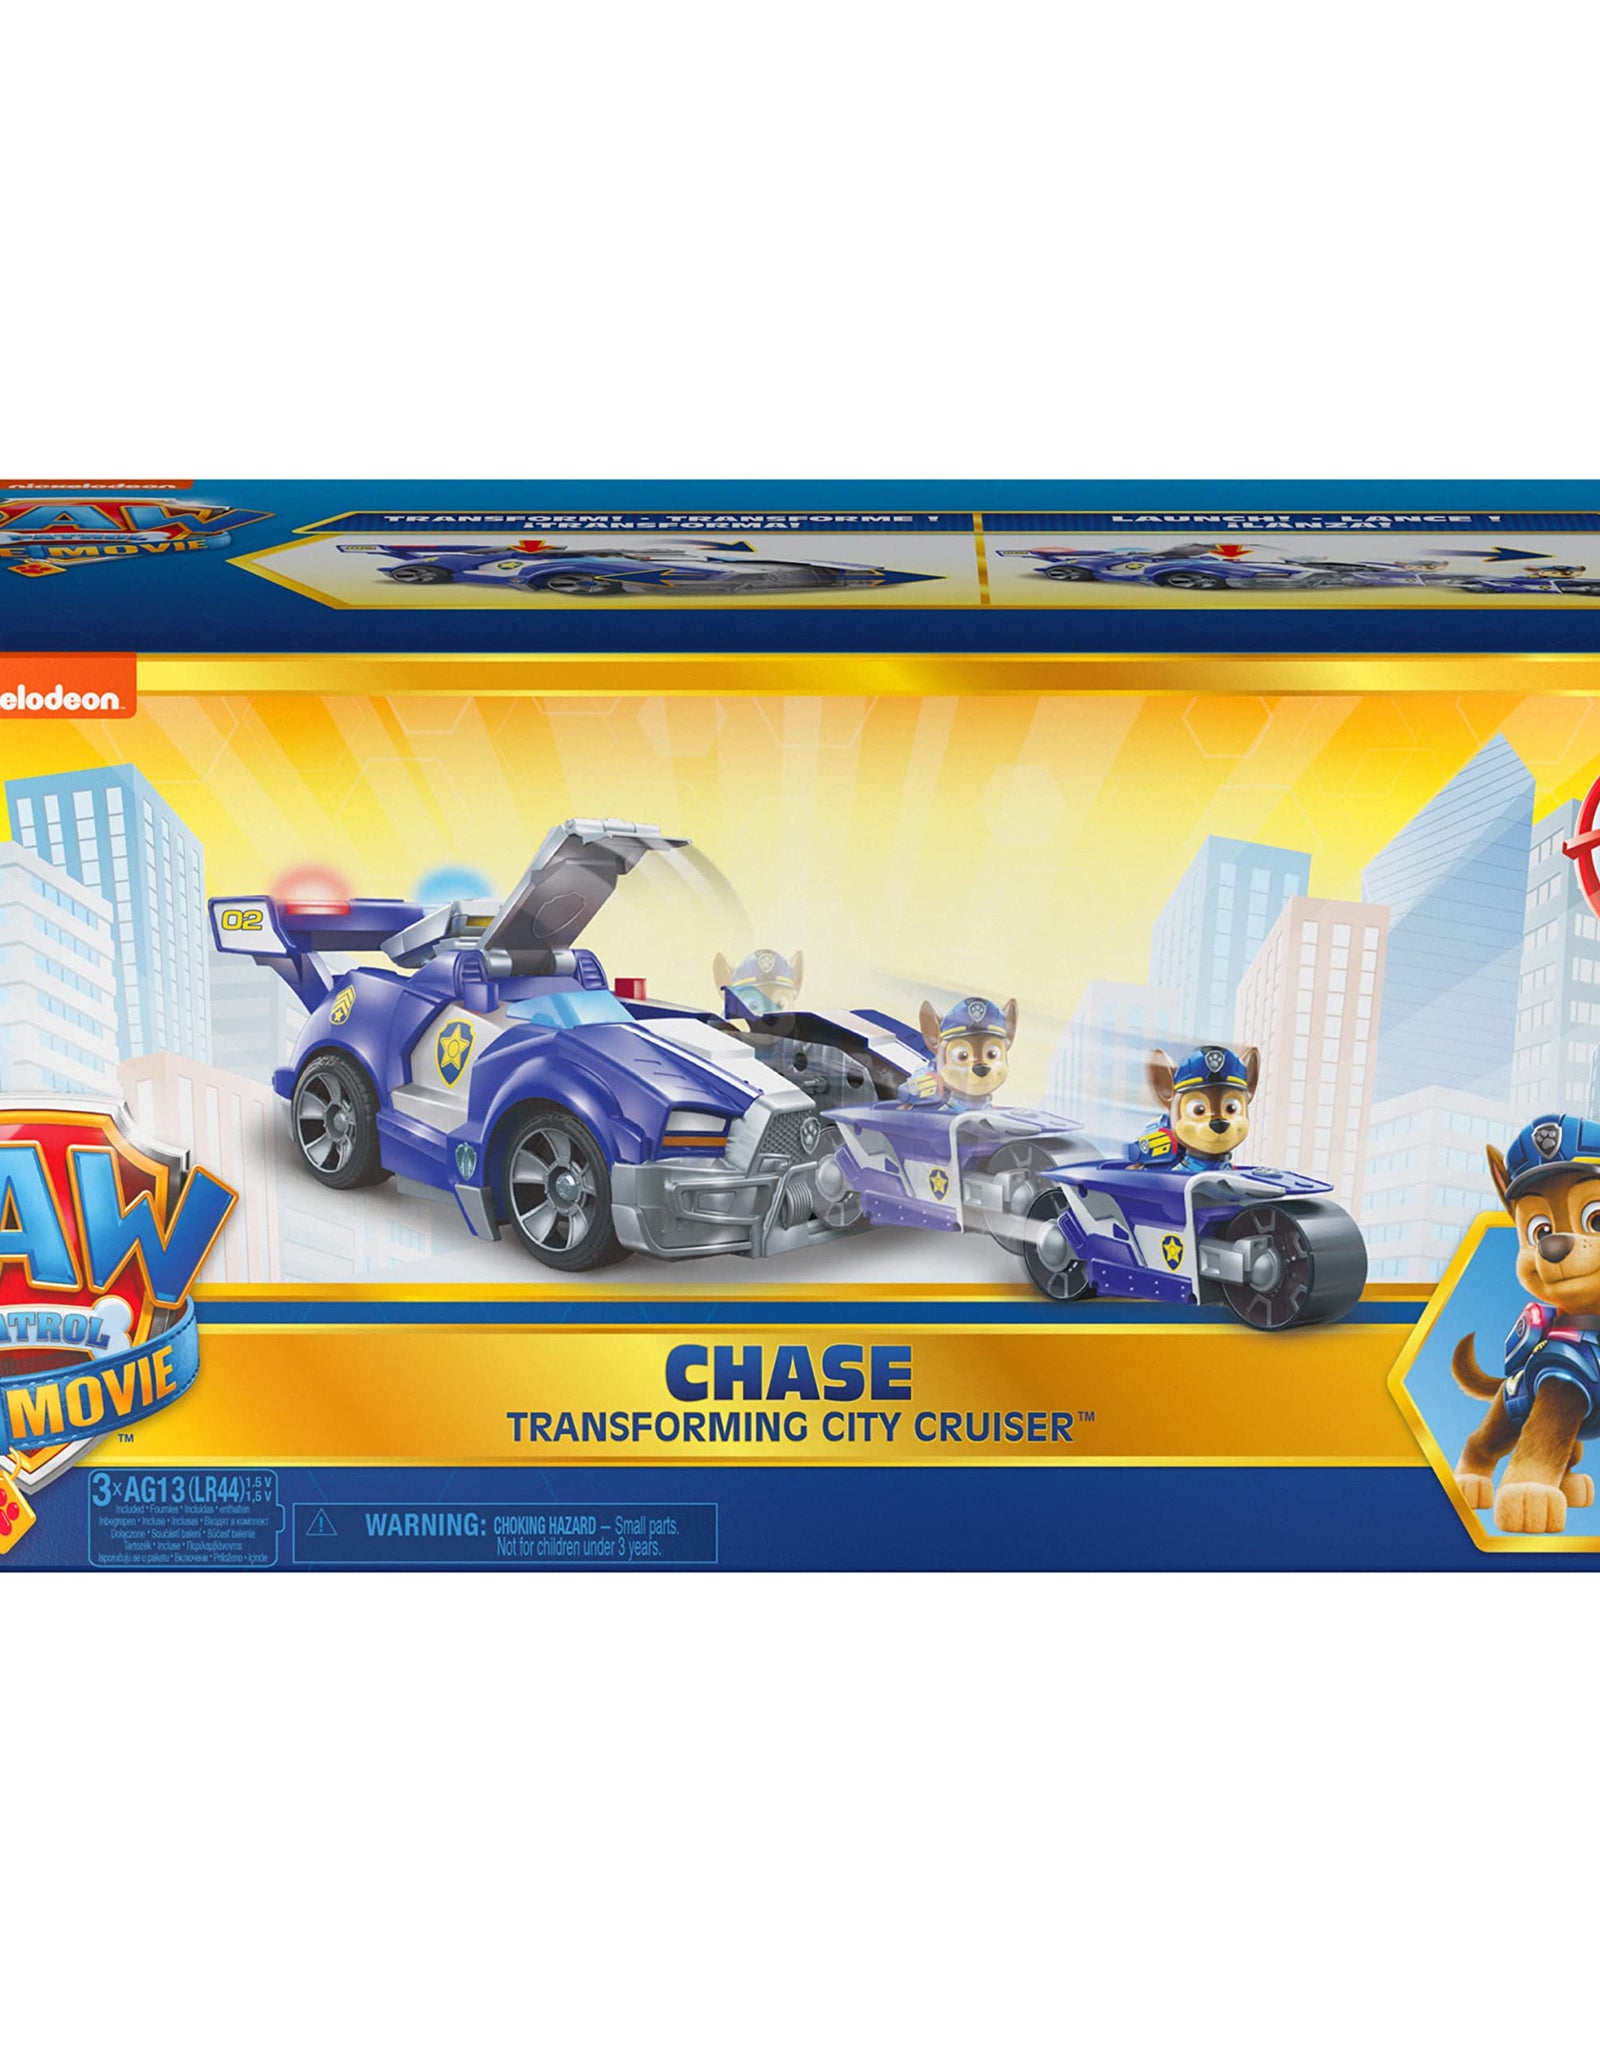 Paw Patrol, Chase 2-in-1 Transforming Movie City Cruiser Toy Car with Motorcycle, Lights, Sounds and Action Figure, Kids Toys for Ages 3 and up